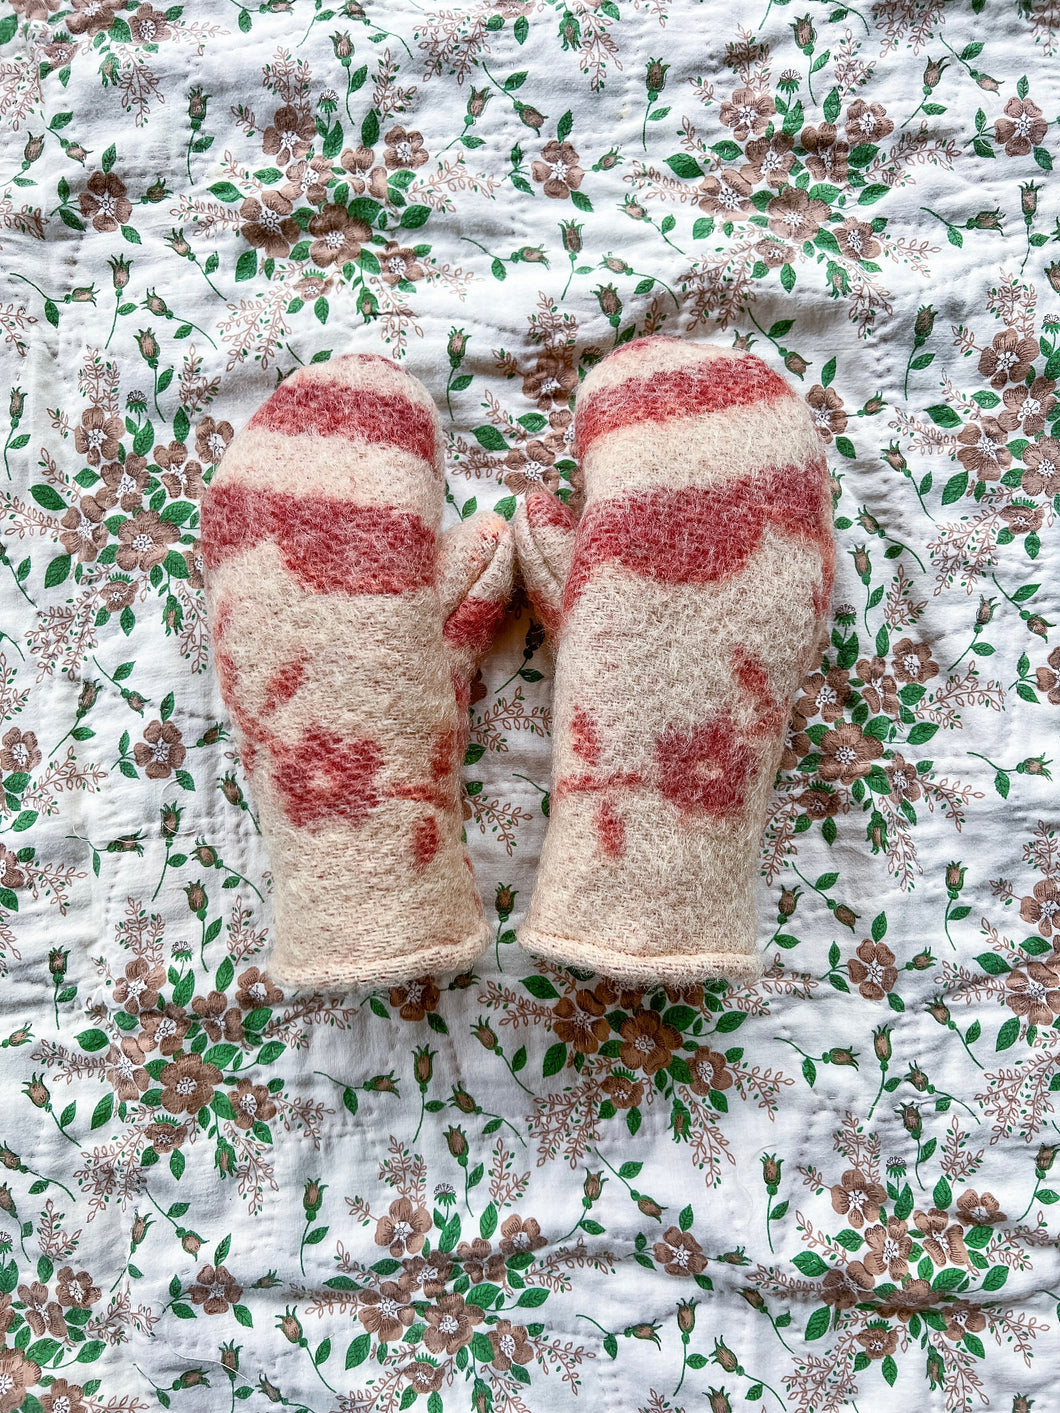 One-of-a-Kind: Orr Health Wool Blanket Mittens #1 (S)